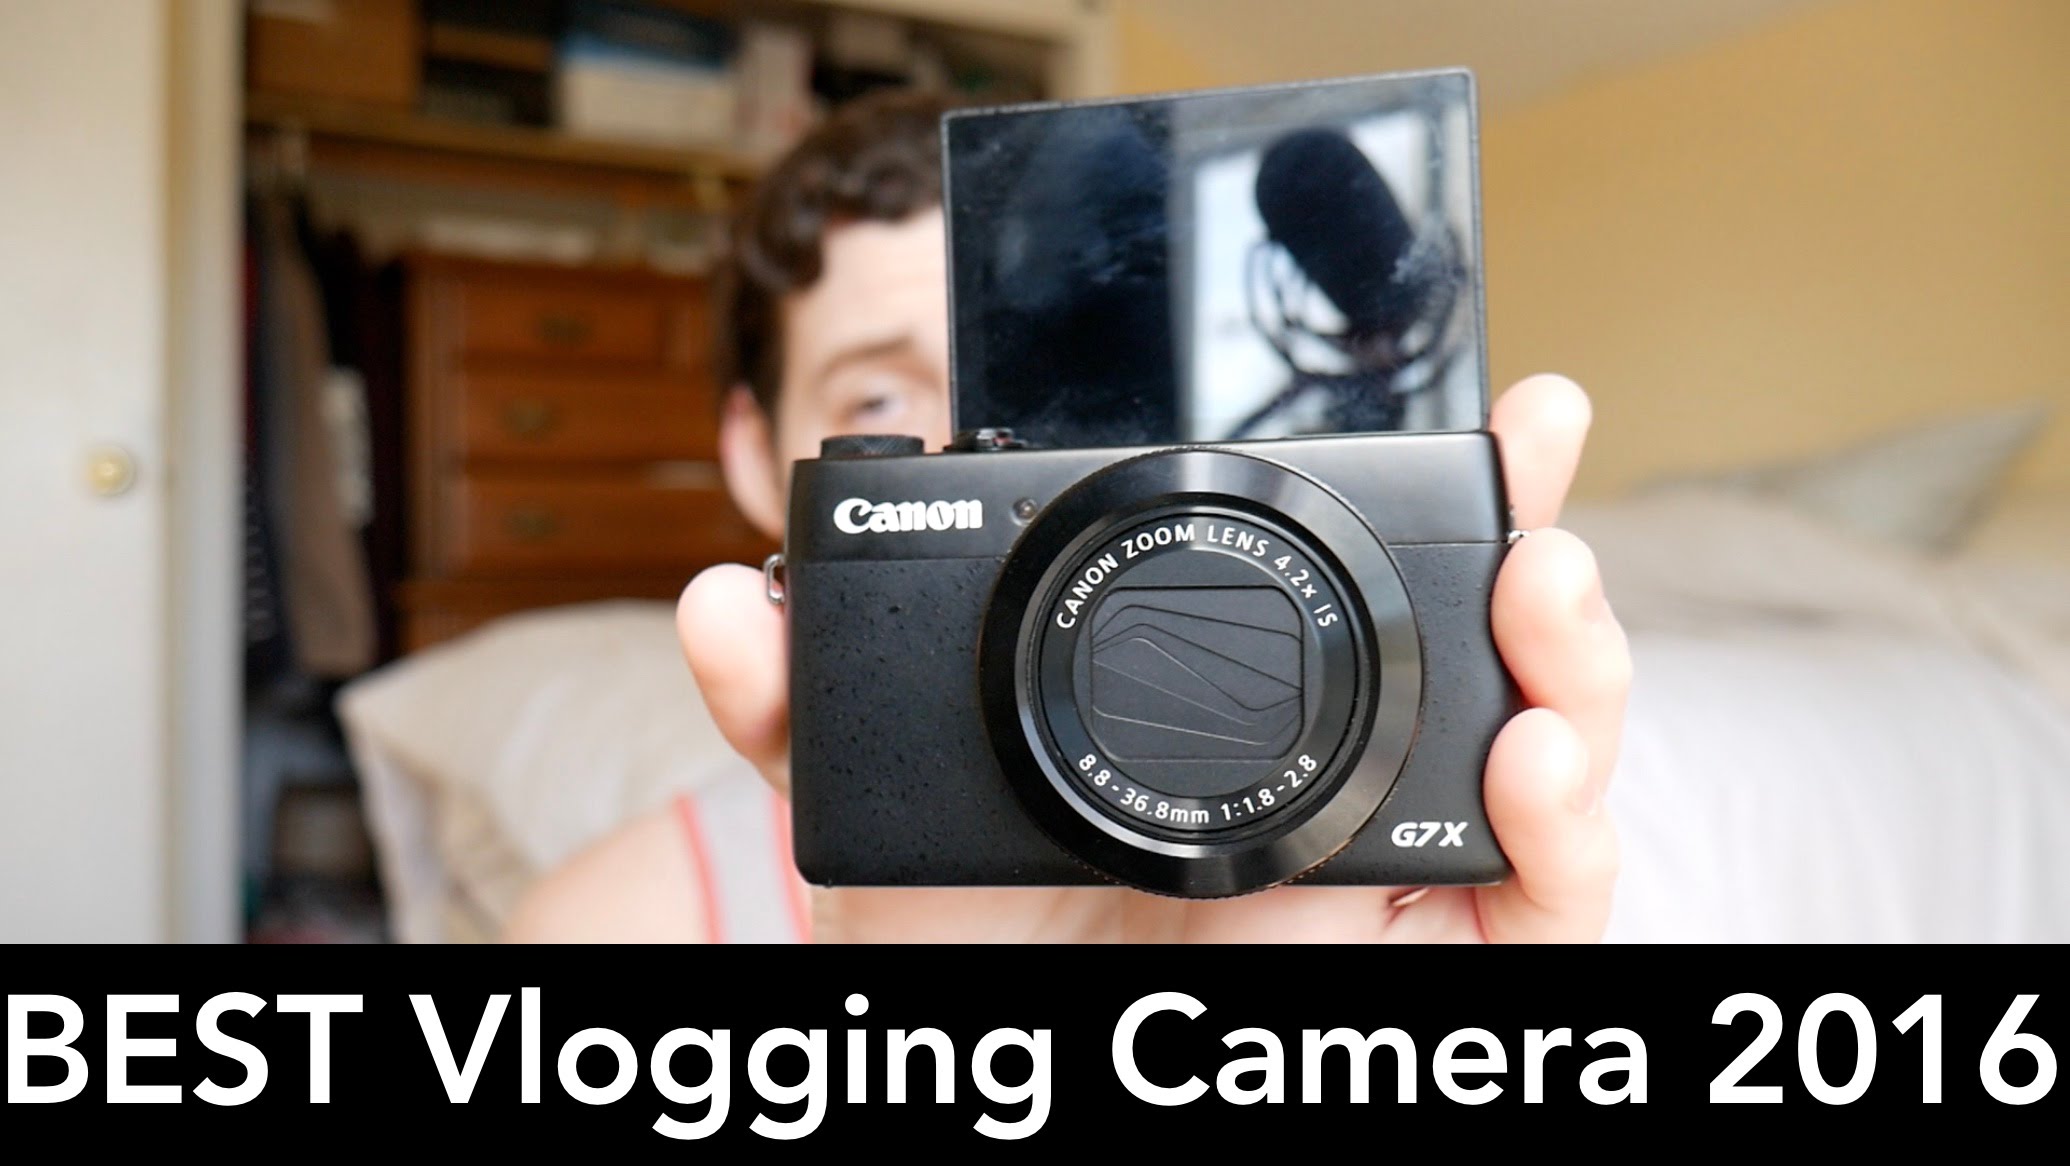 BEST Vlogging Camera 2016 UPDATED (Canon G7x Review)